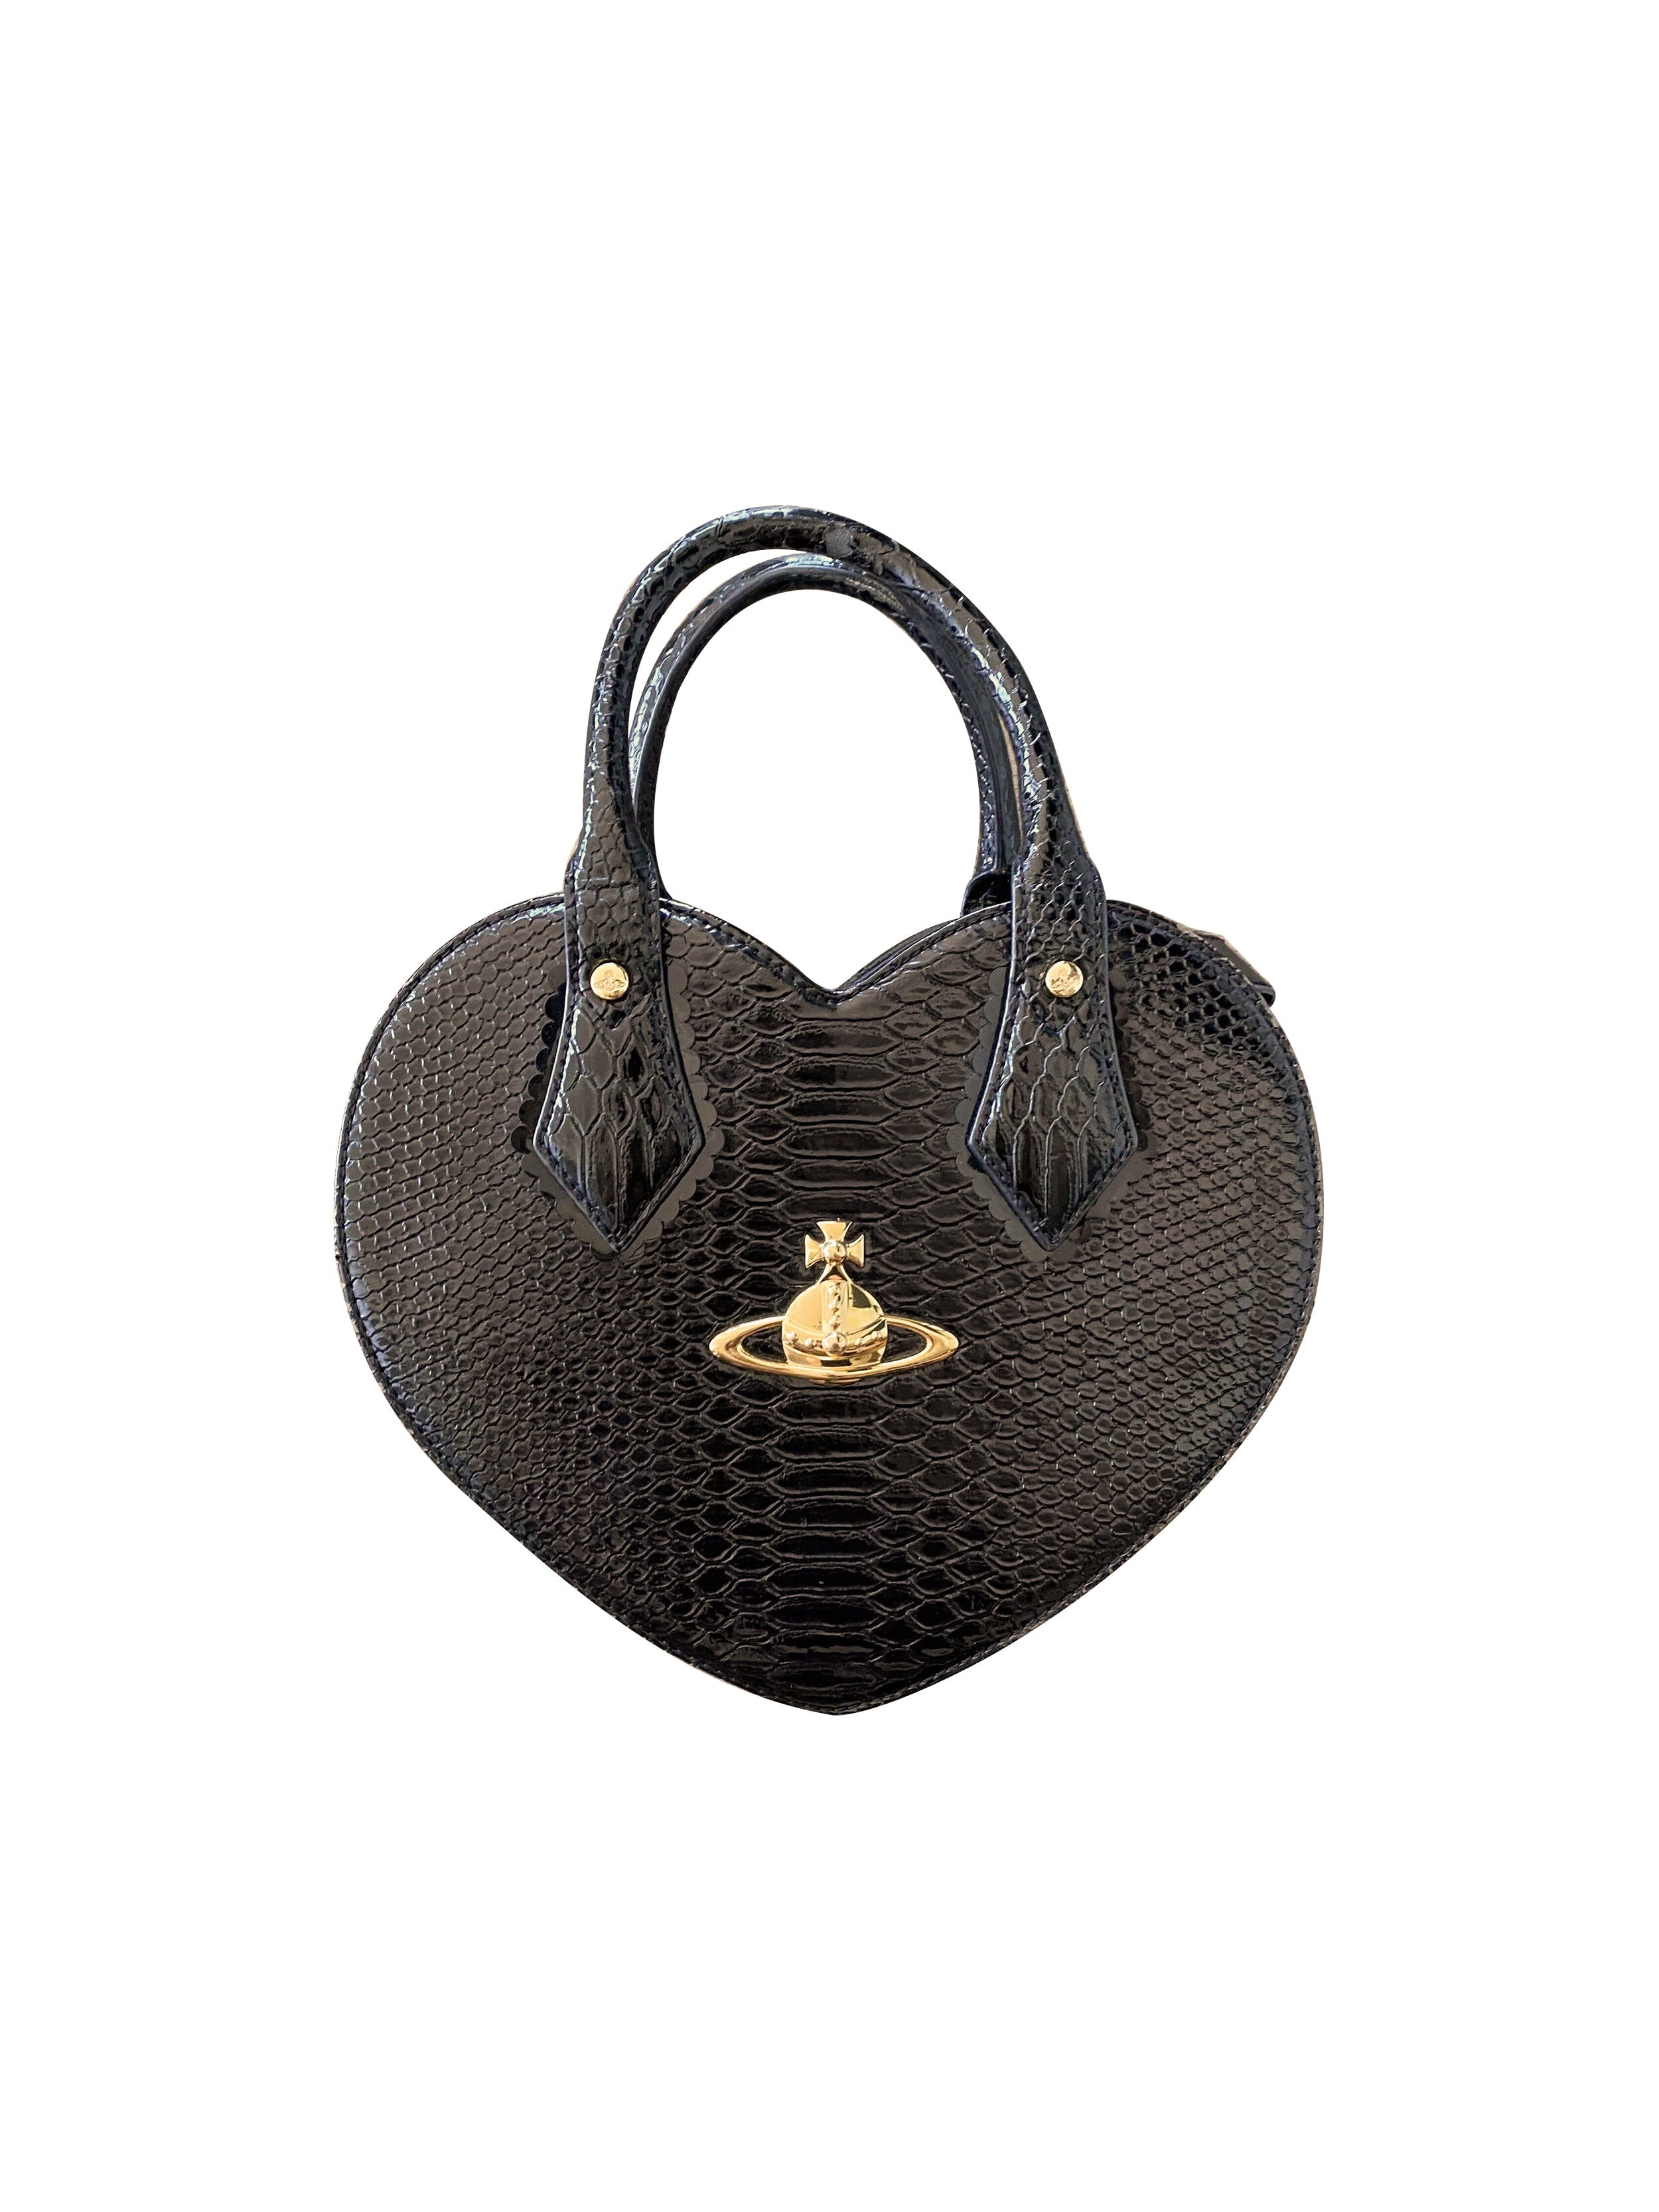 Vivienne Westwood 2000s Python Heart Leather Bag · INTO